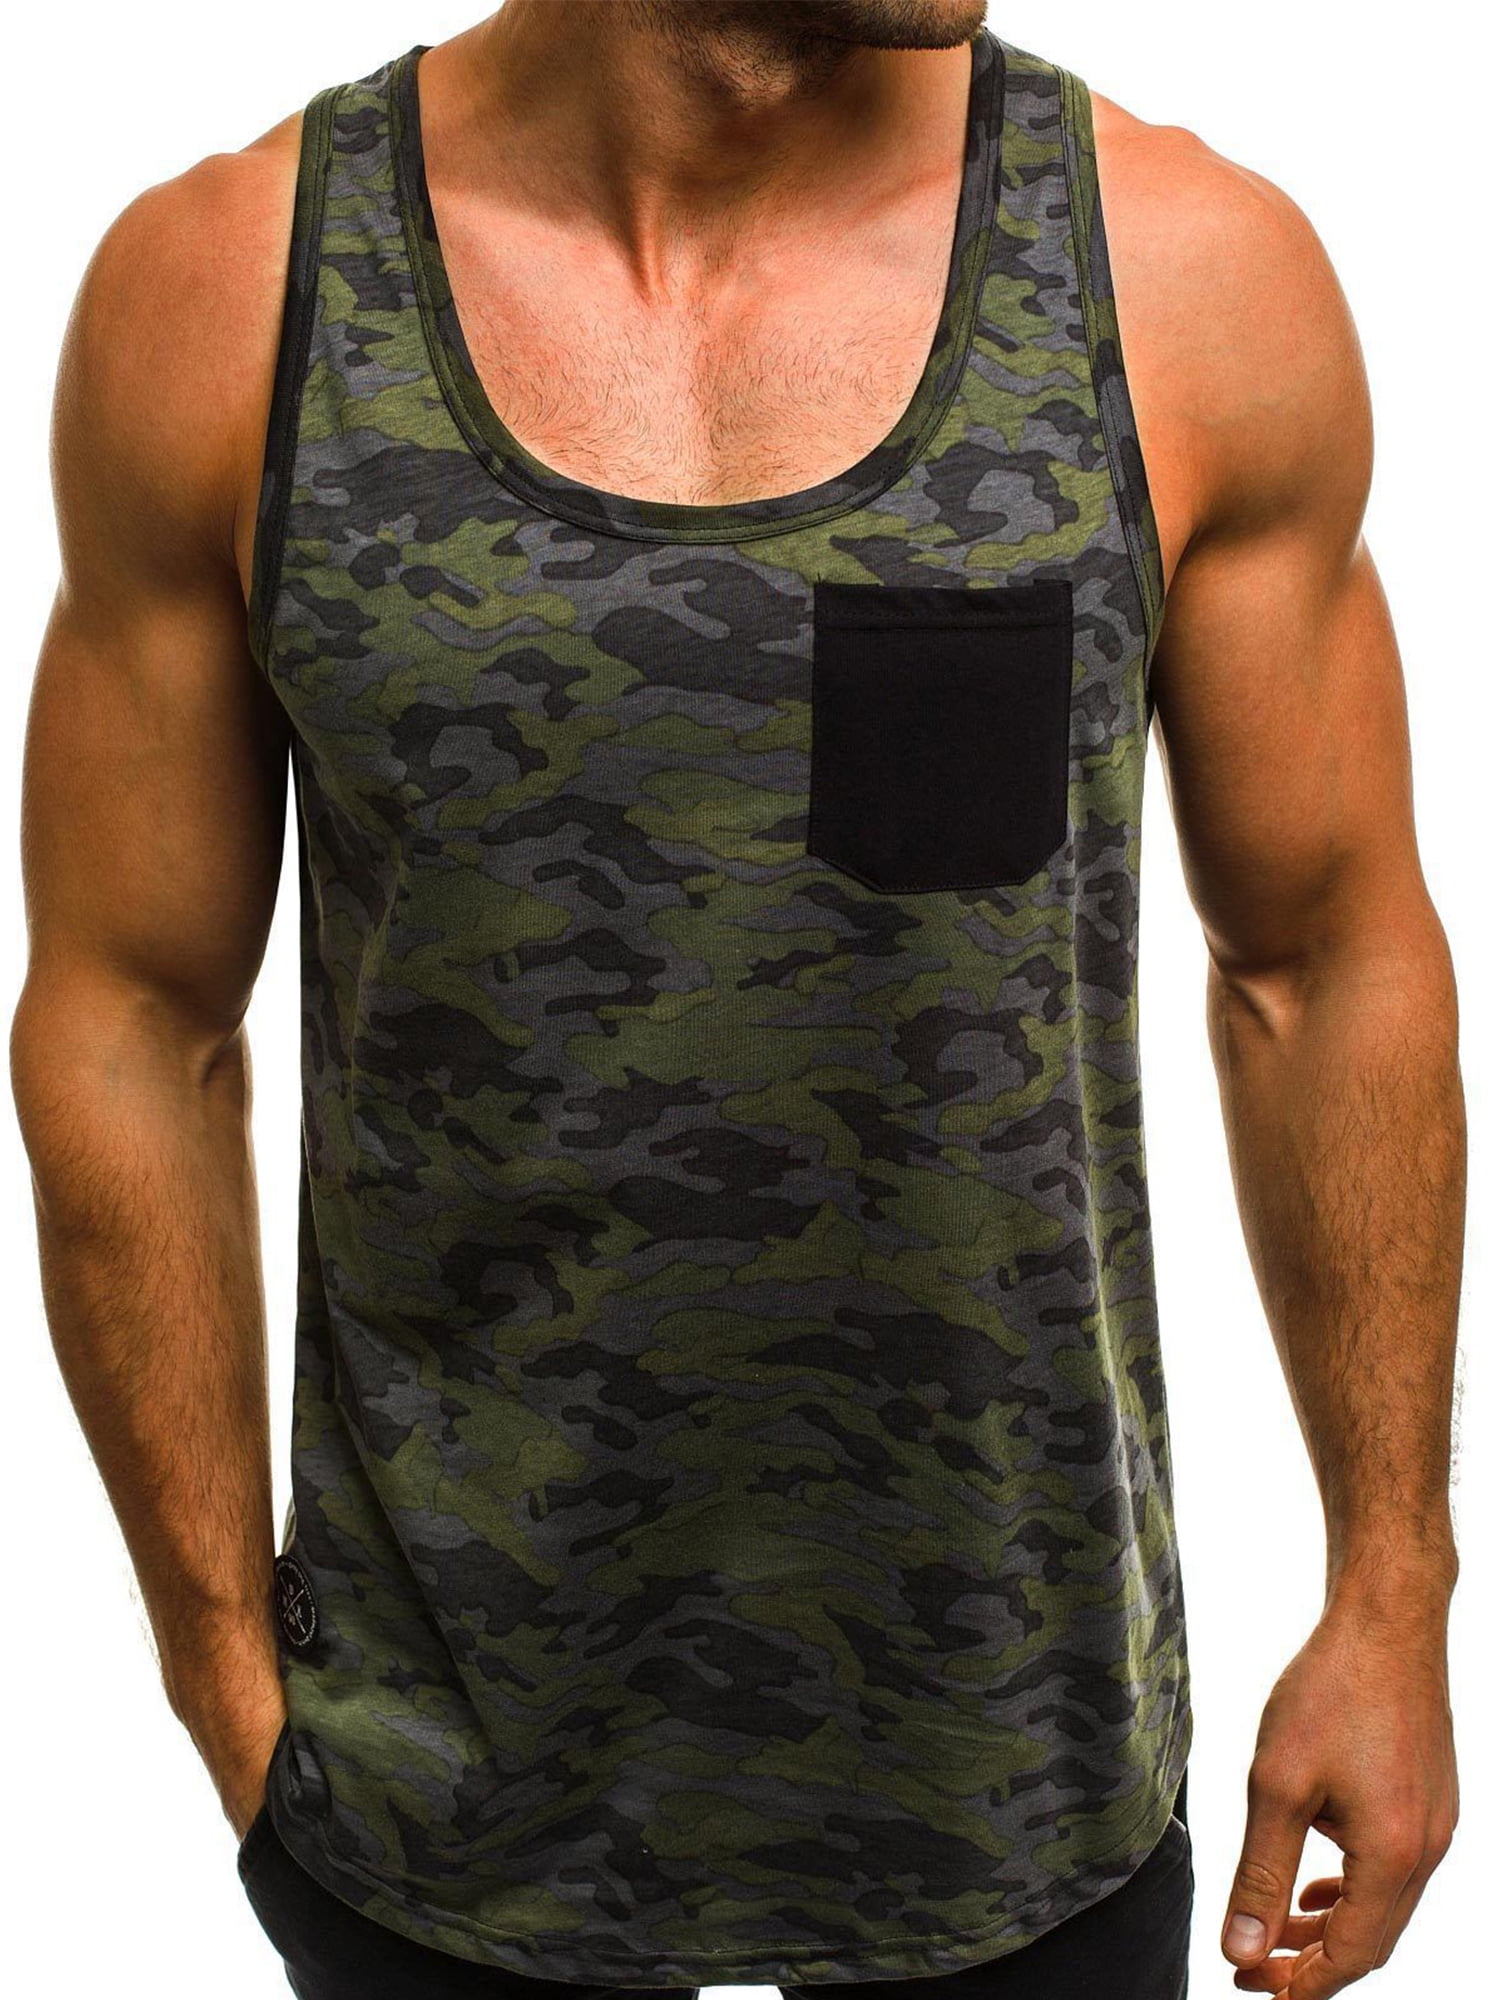 Men Camouflage Tank Top Long Length Curved Hem Hooded Sleeveless Lightweight Quick-Dry Vest Muscle T-Shirt 